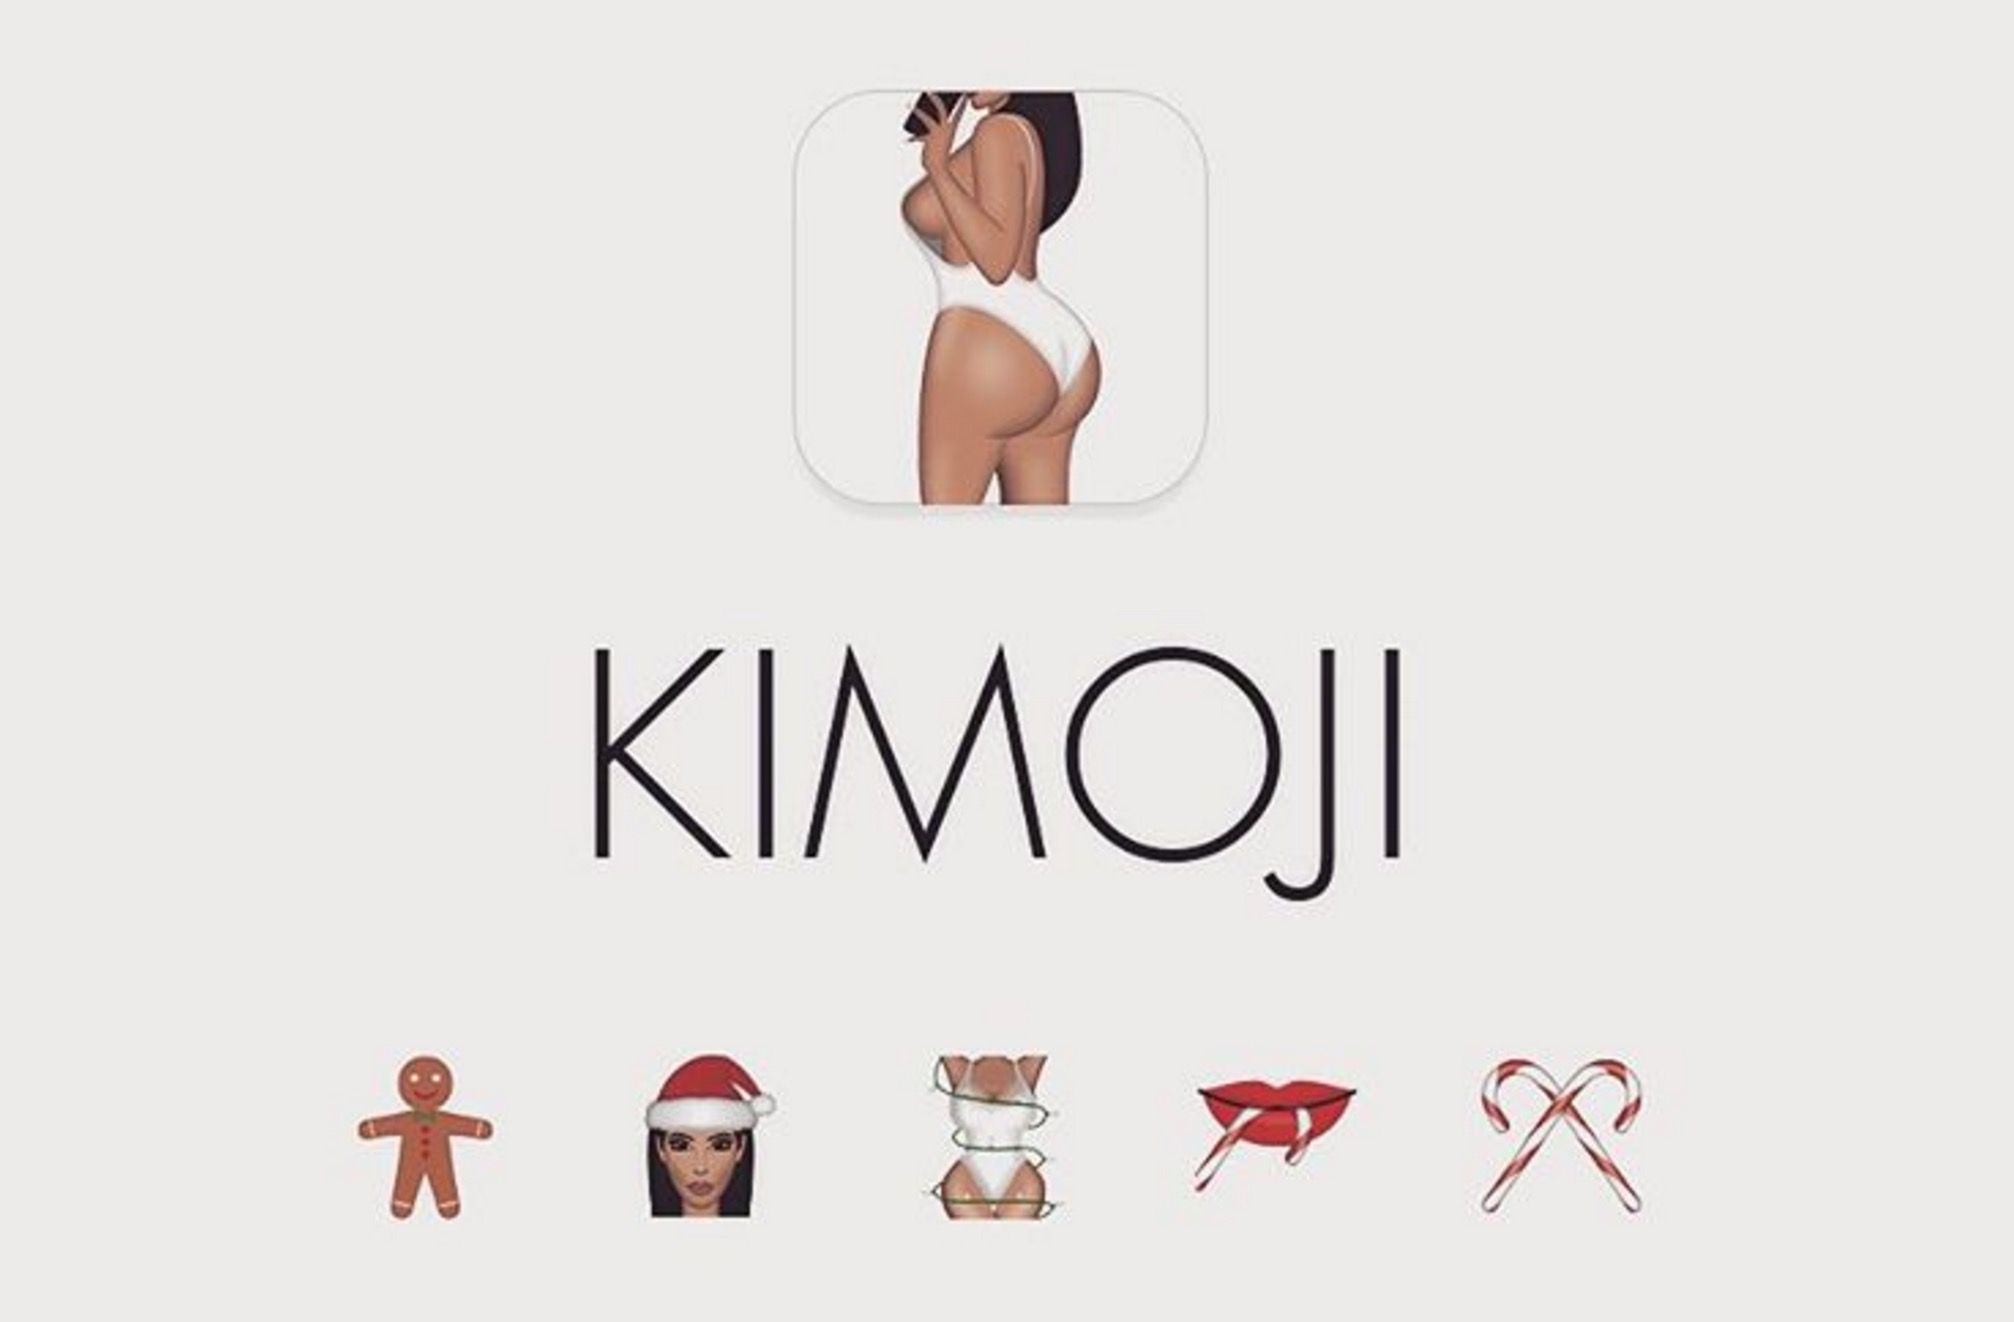 kim k s bum and other assets have been emoji fied image 1